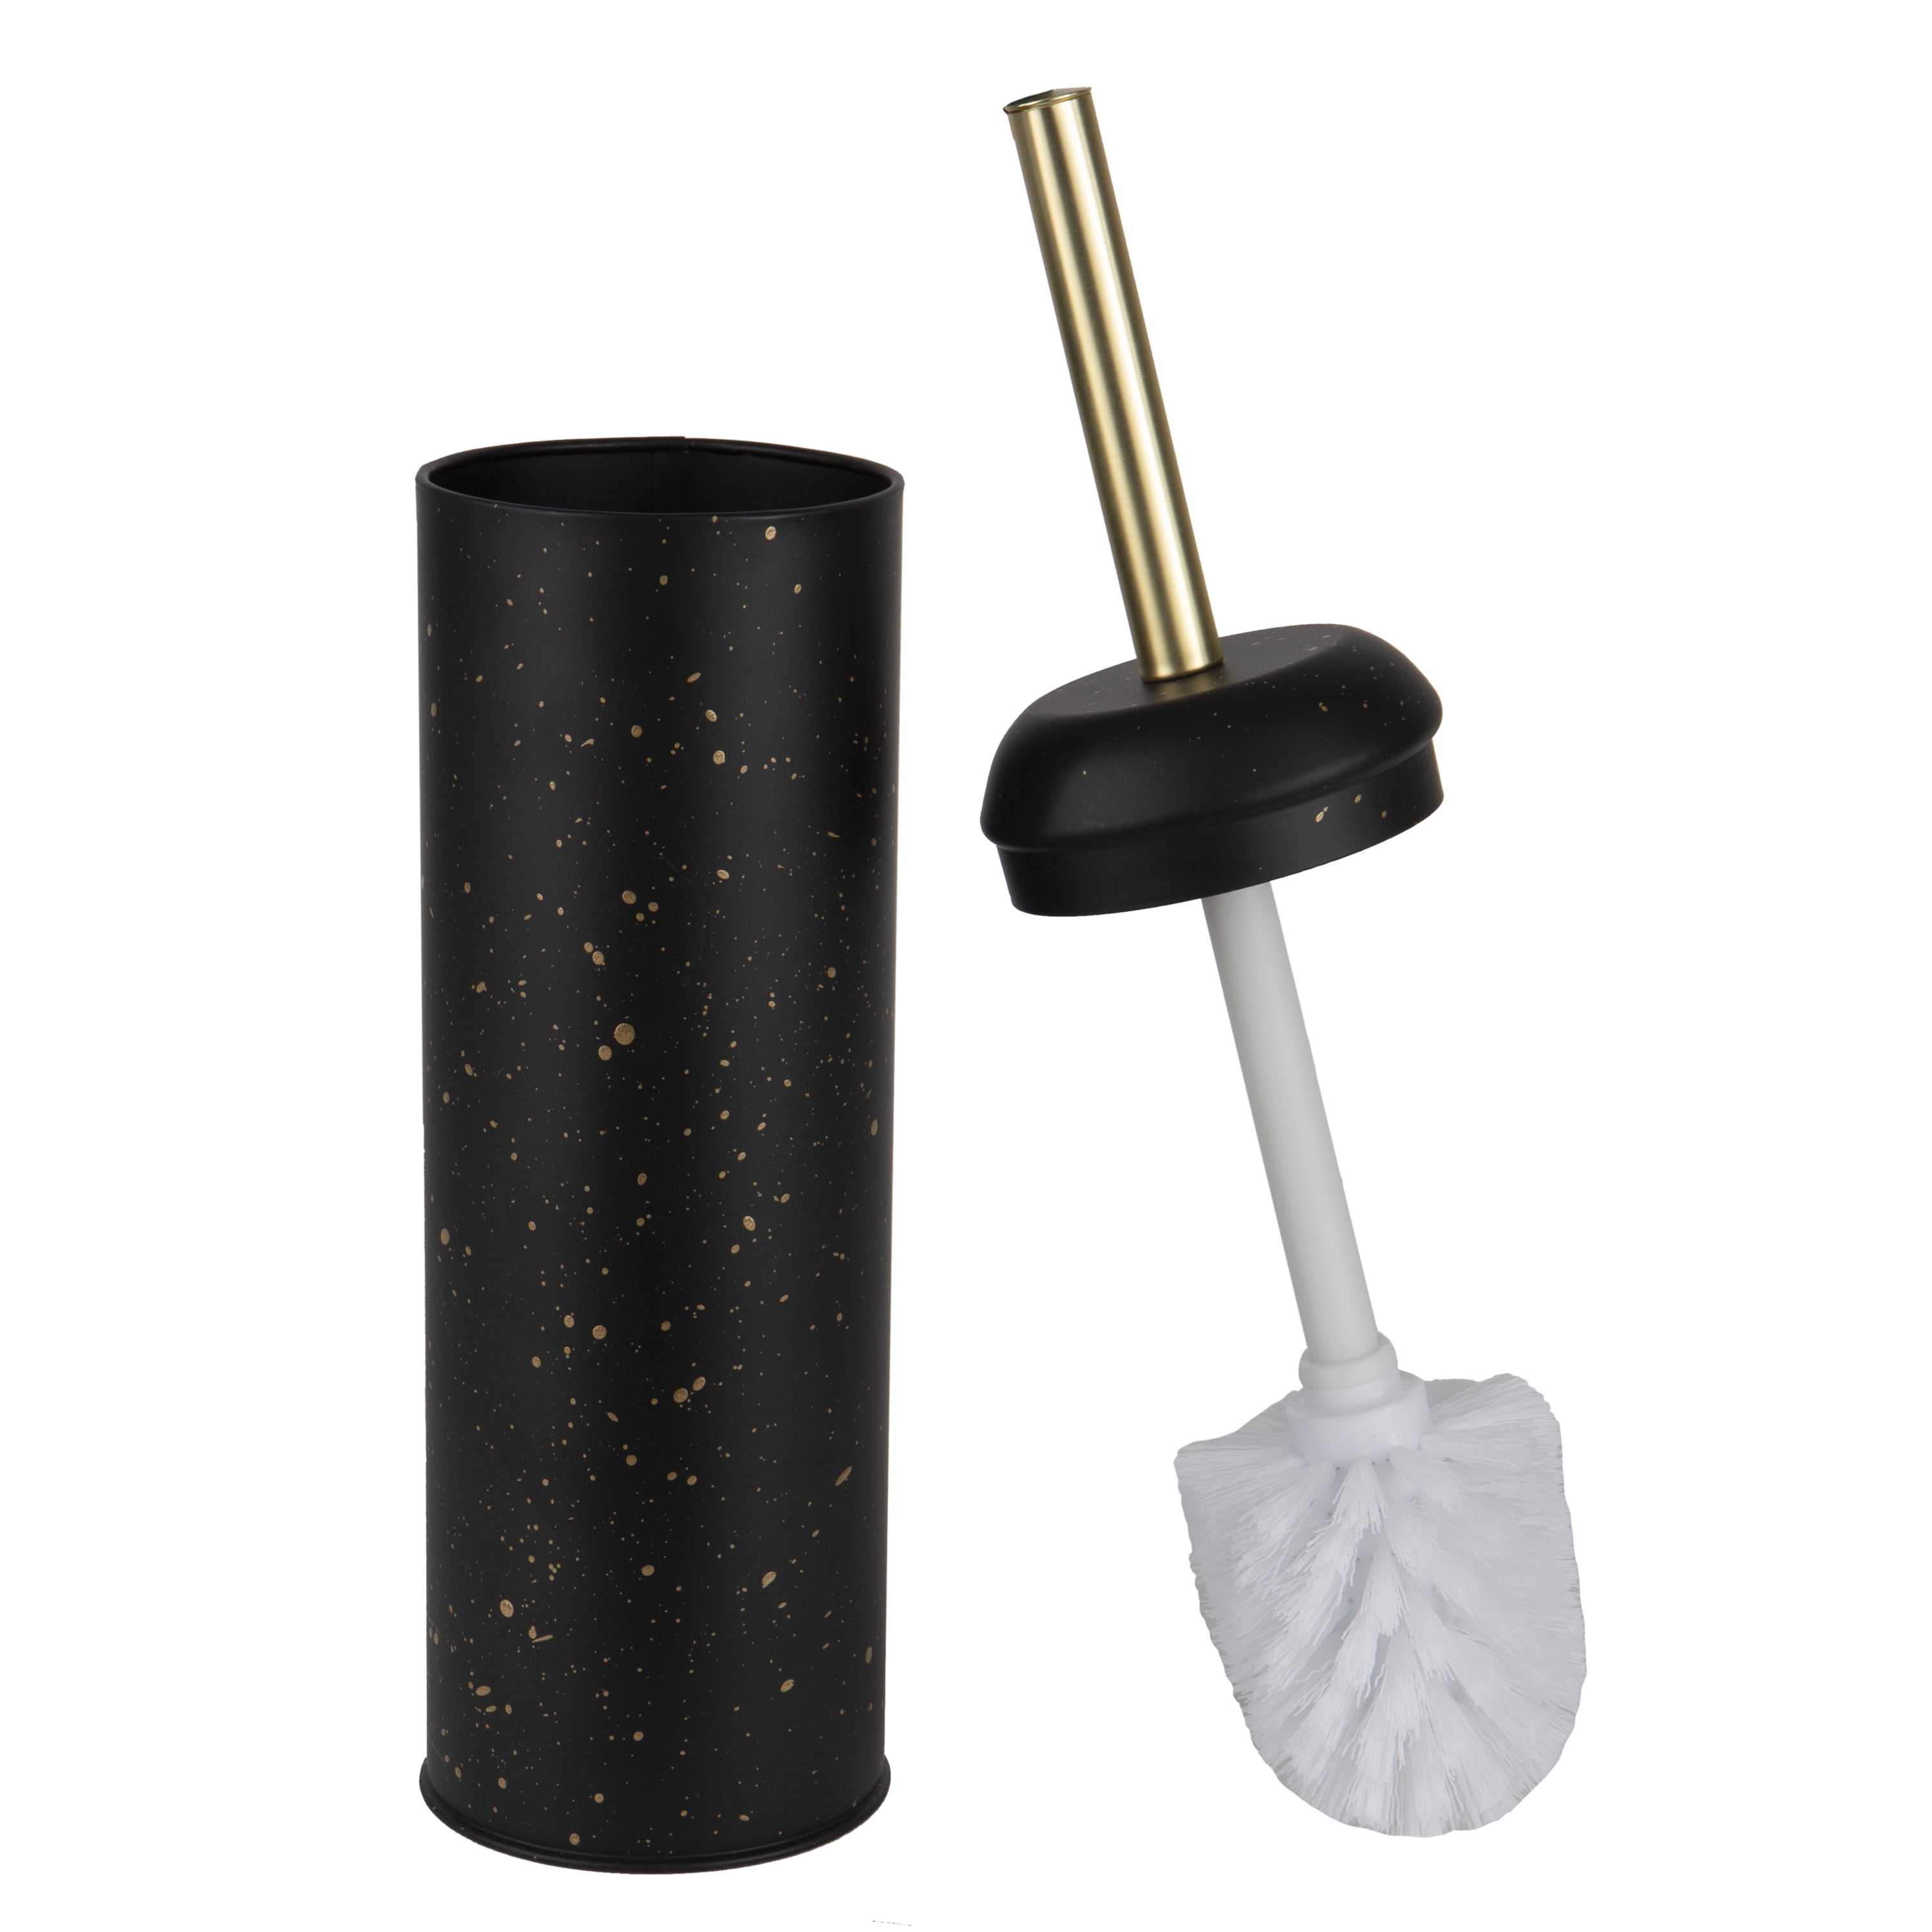 Slim Bathroom Accessory Made of Plastic Free-Standing Brush and Holder with Silicone Bristles iDesign Toilet Brush with Toilet Brush Holder Black 